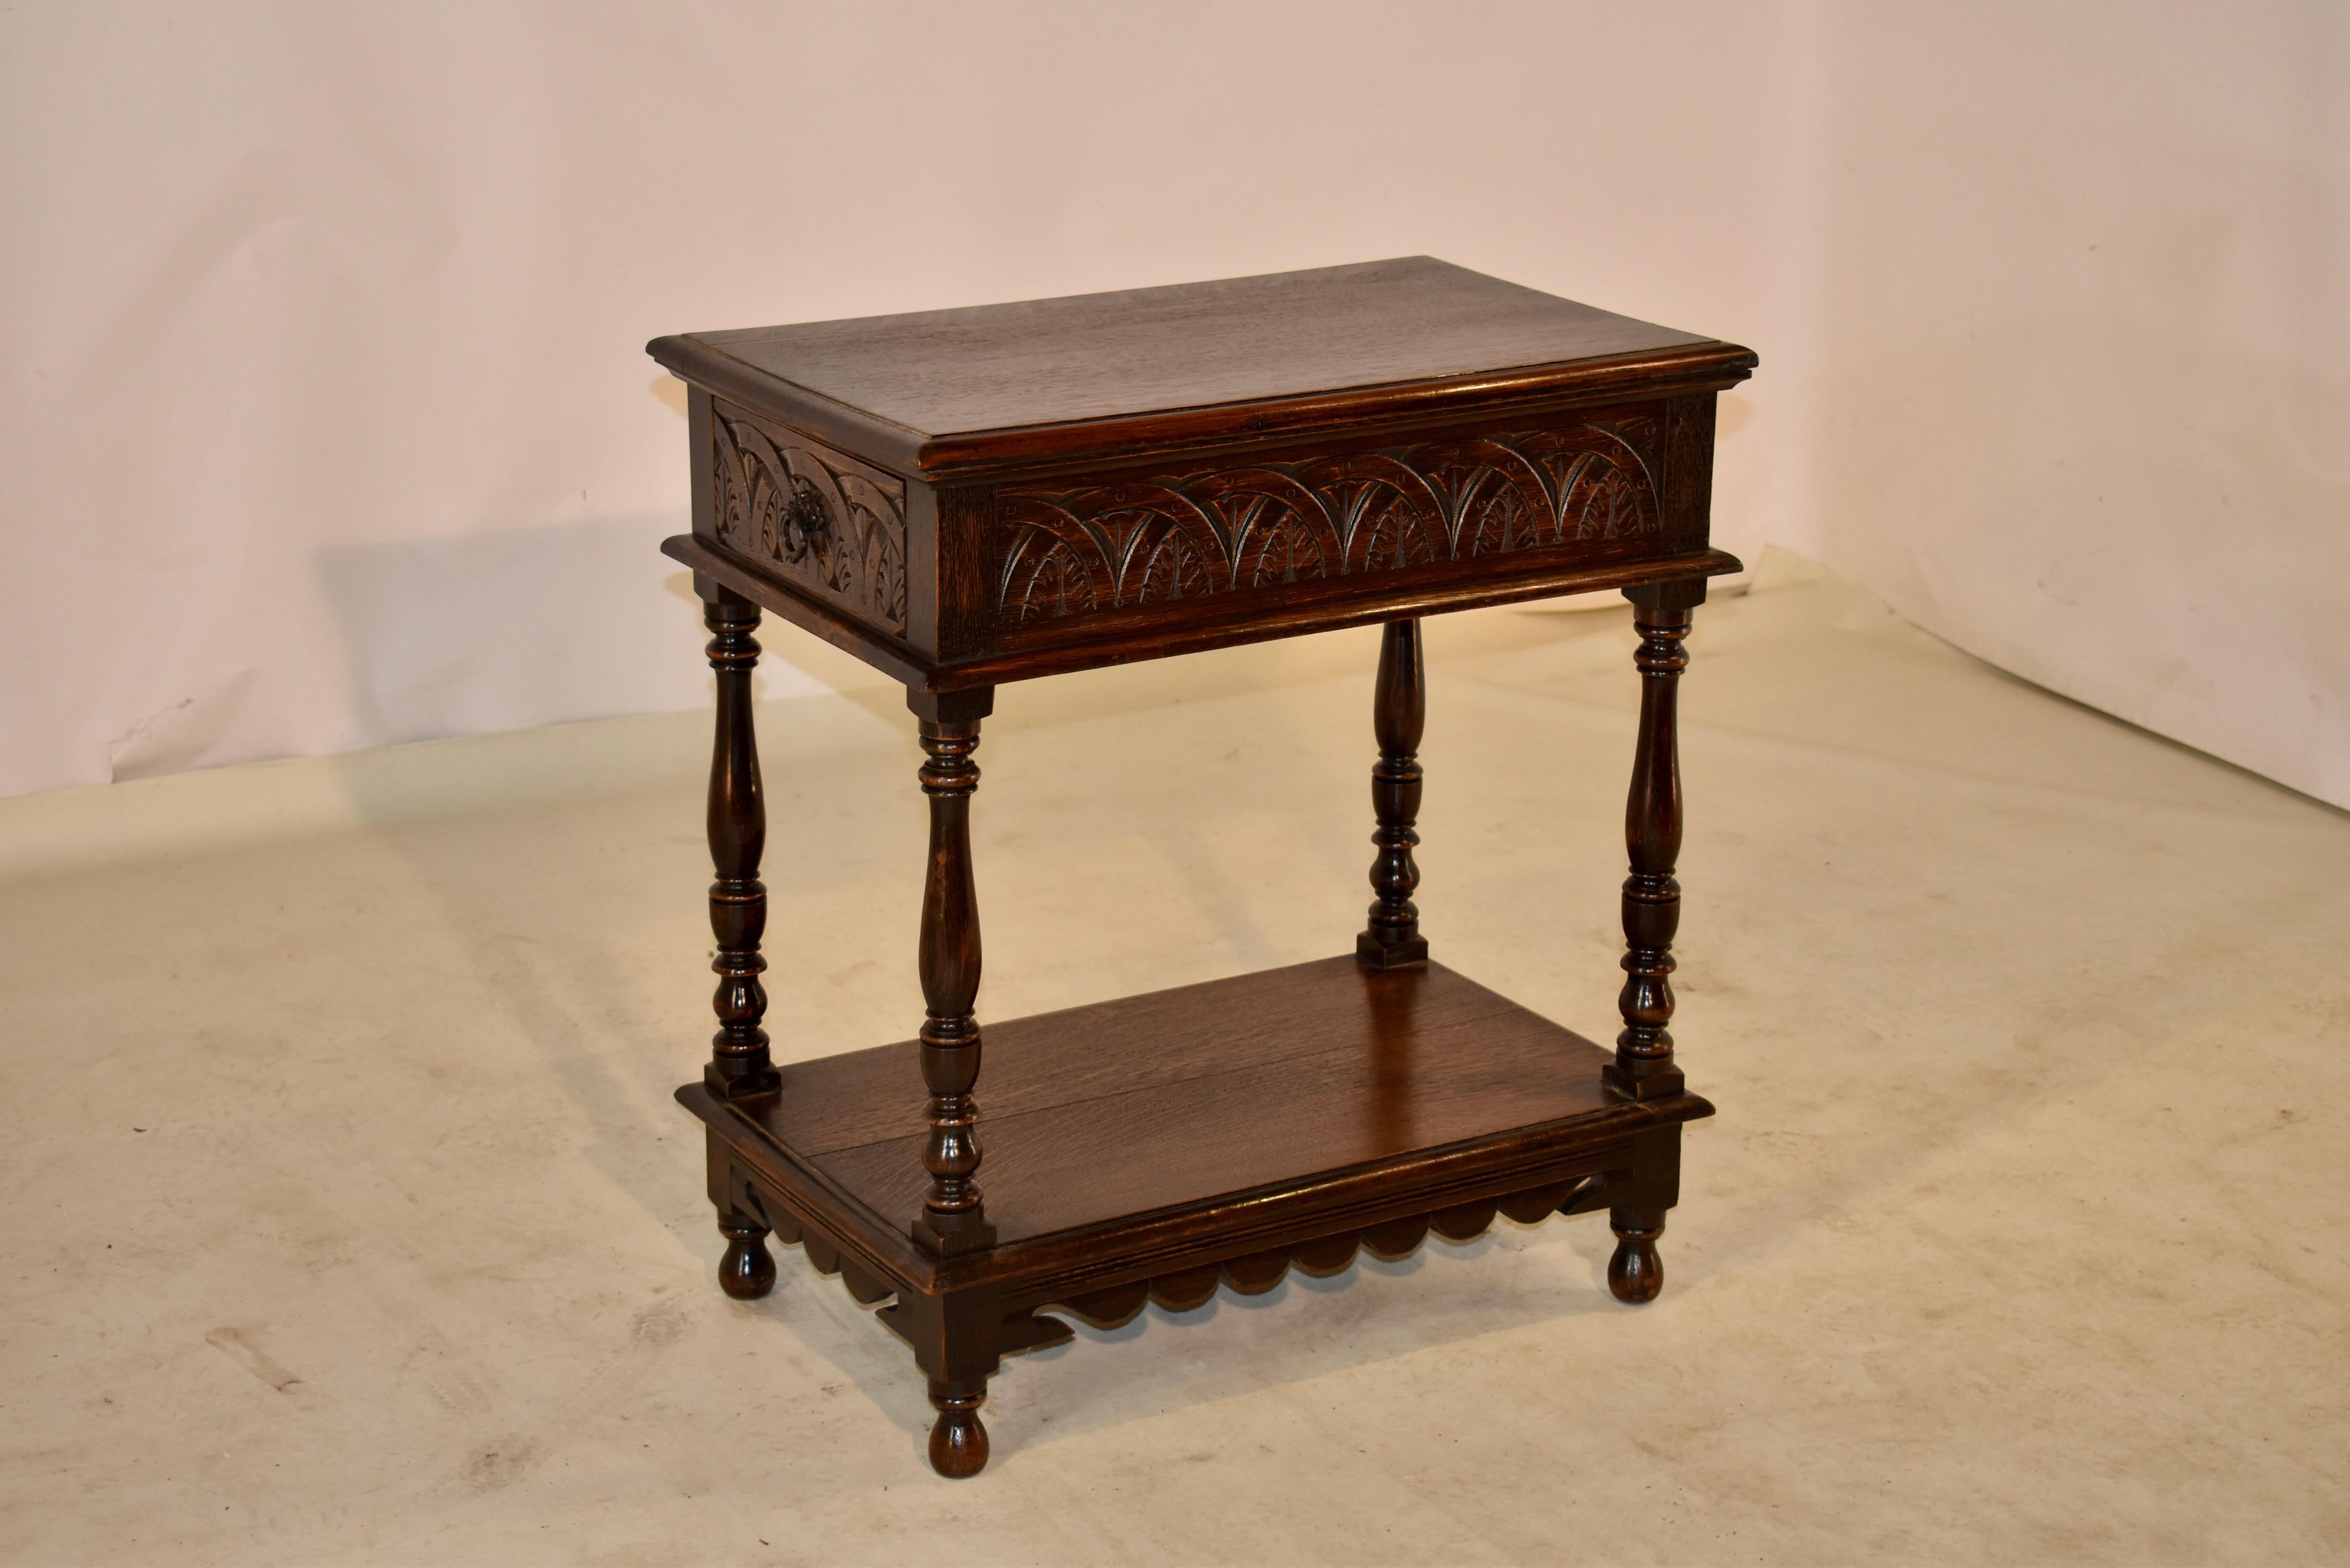 19th century oak side table from England with a beveled edge around the top, following down to a wonderfully carved apron which contains a single drawer on one end of the table. The apron is carved on all four sides for easy placement in any room.